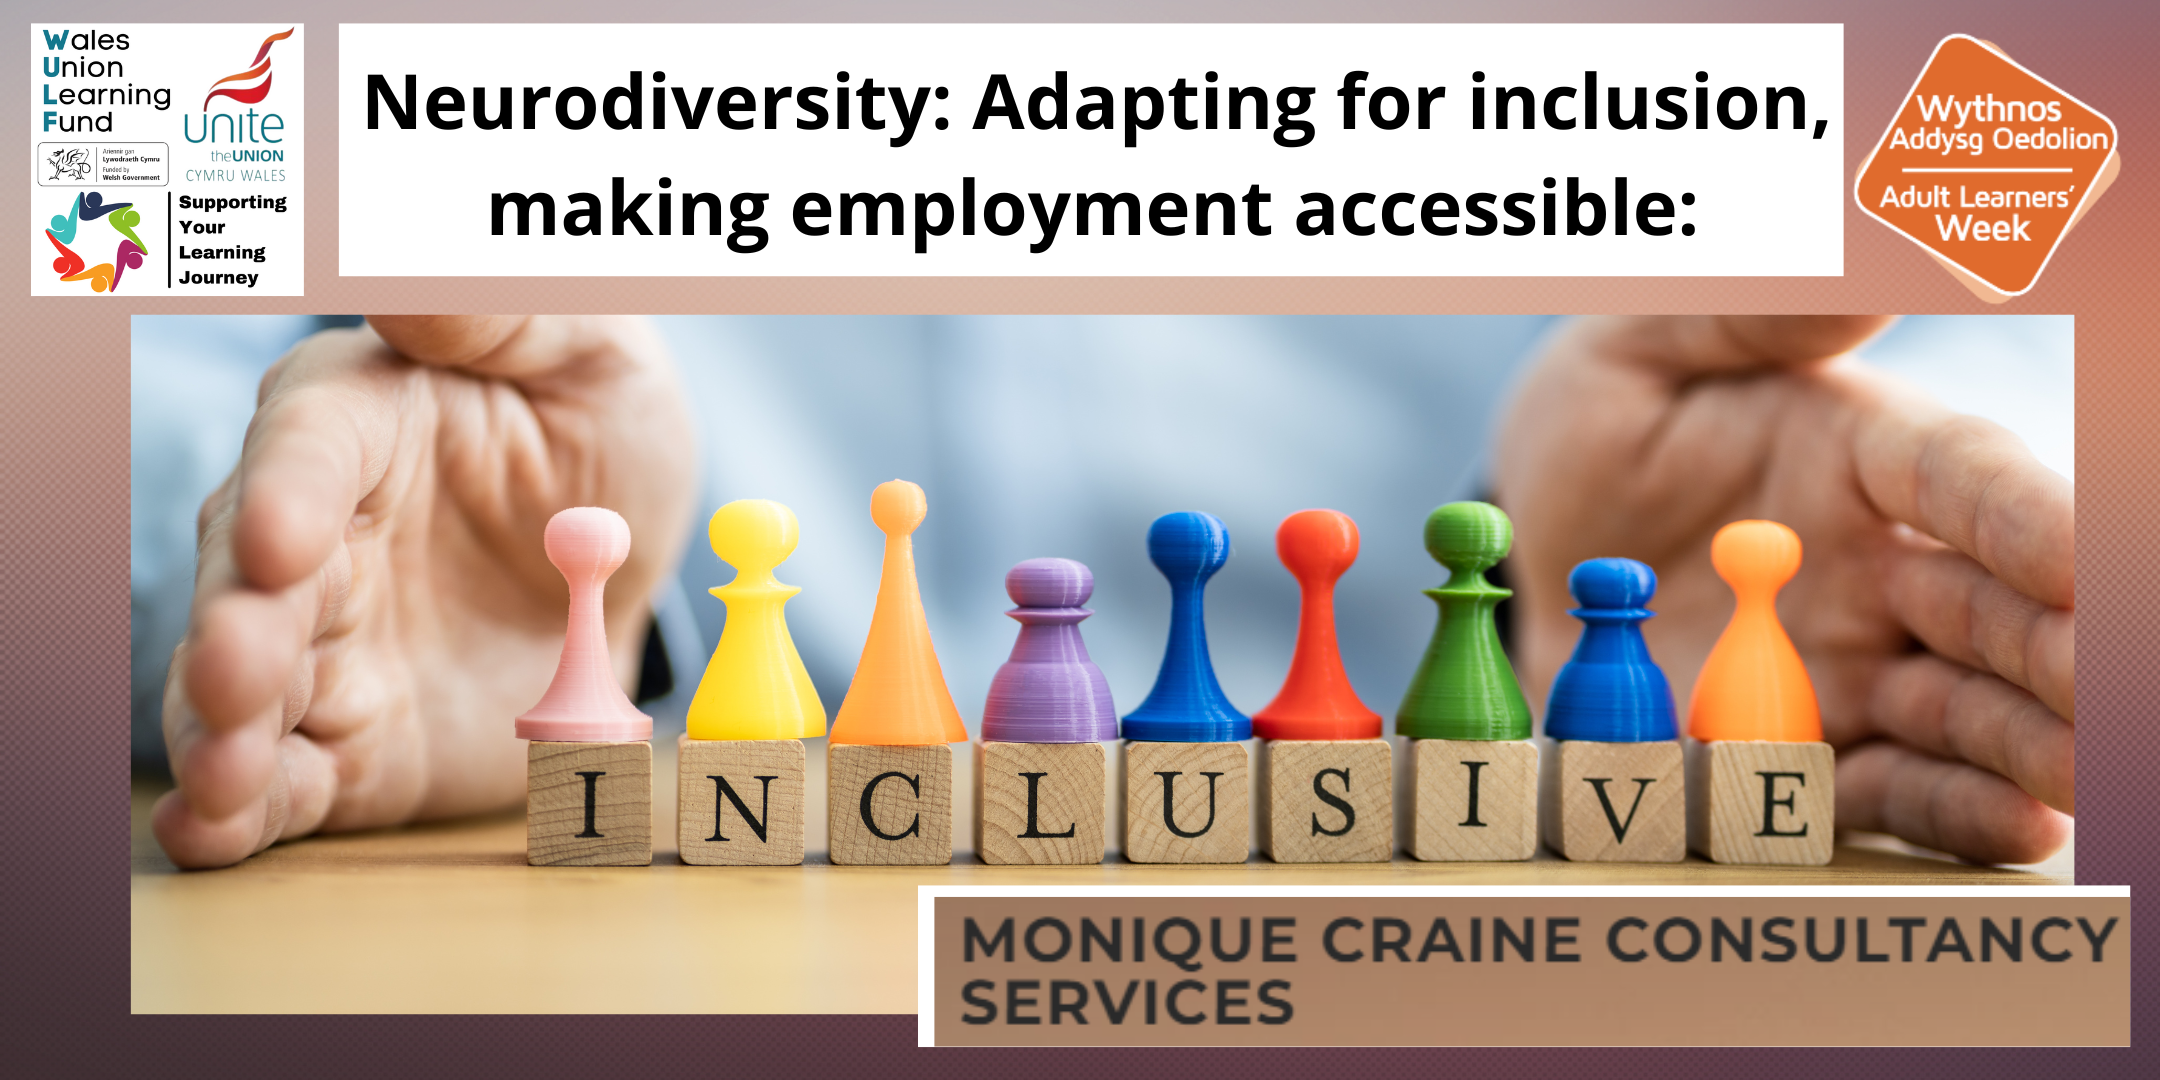 neurodiversity-adapting-for-inclusion-making-employment-accessible